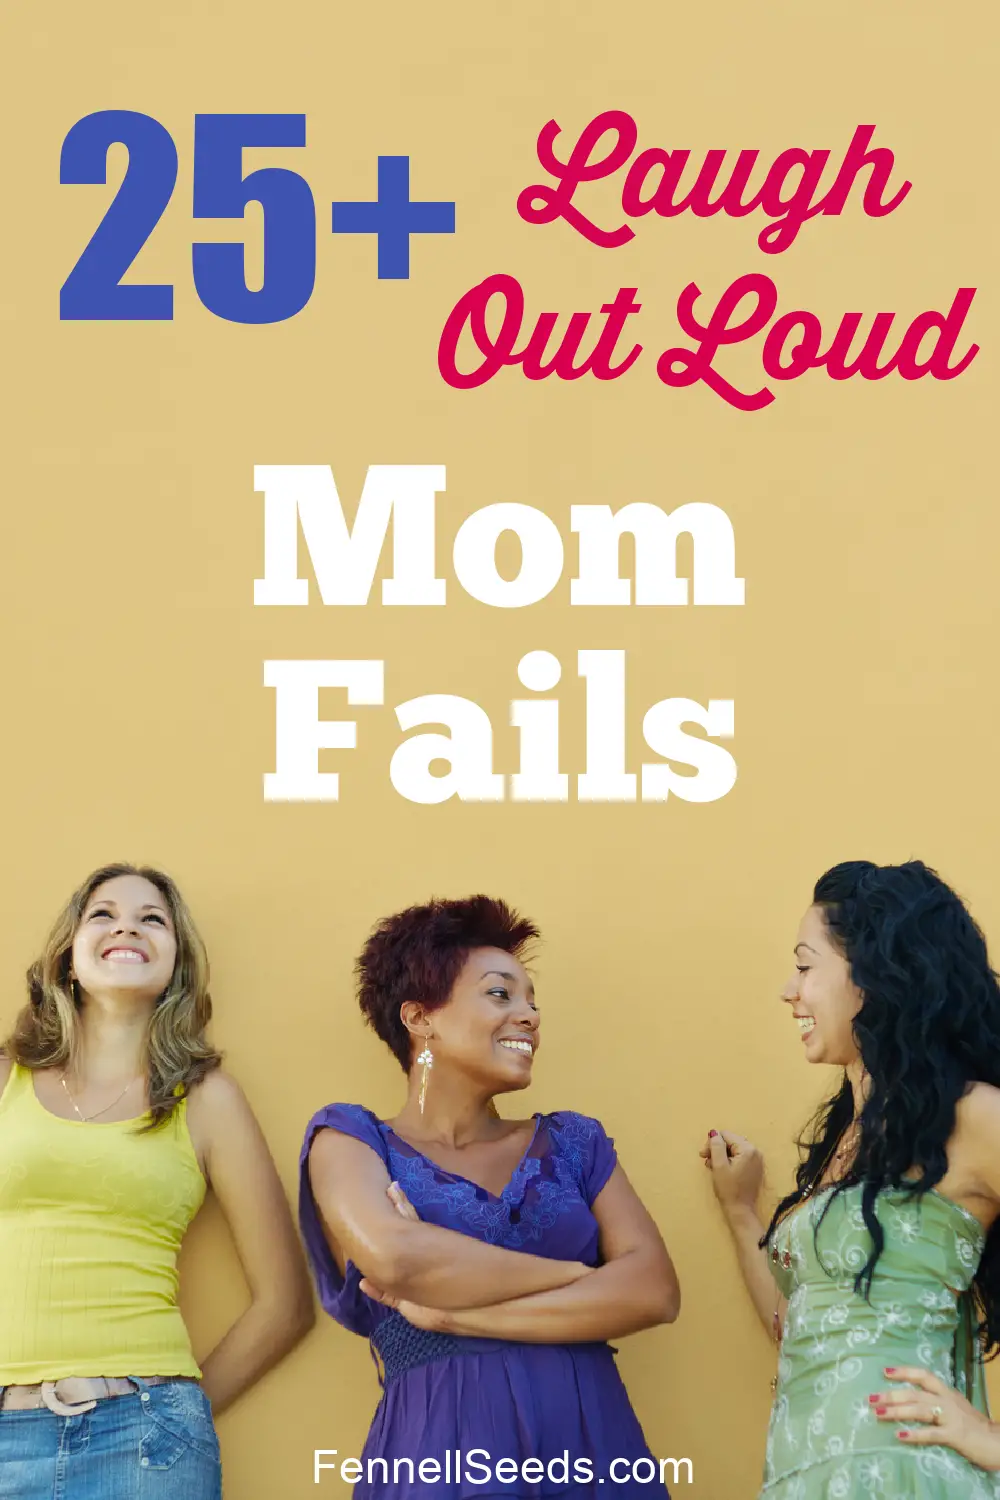 Funny Mom Fails that will make you laugh. Picture of 3 moms talking and laughing.